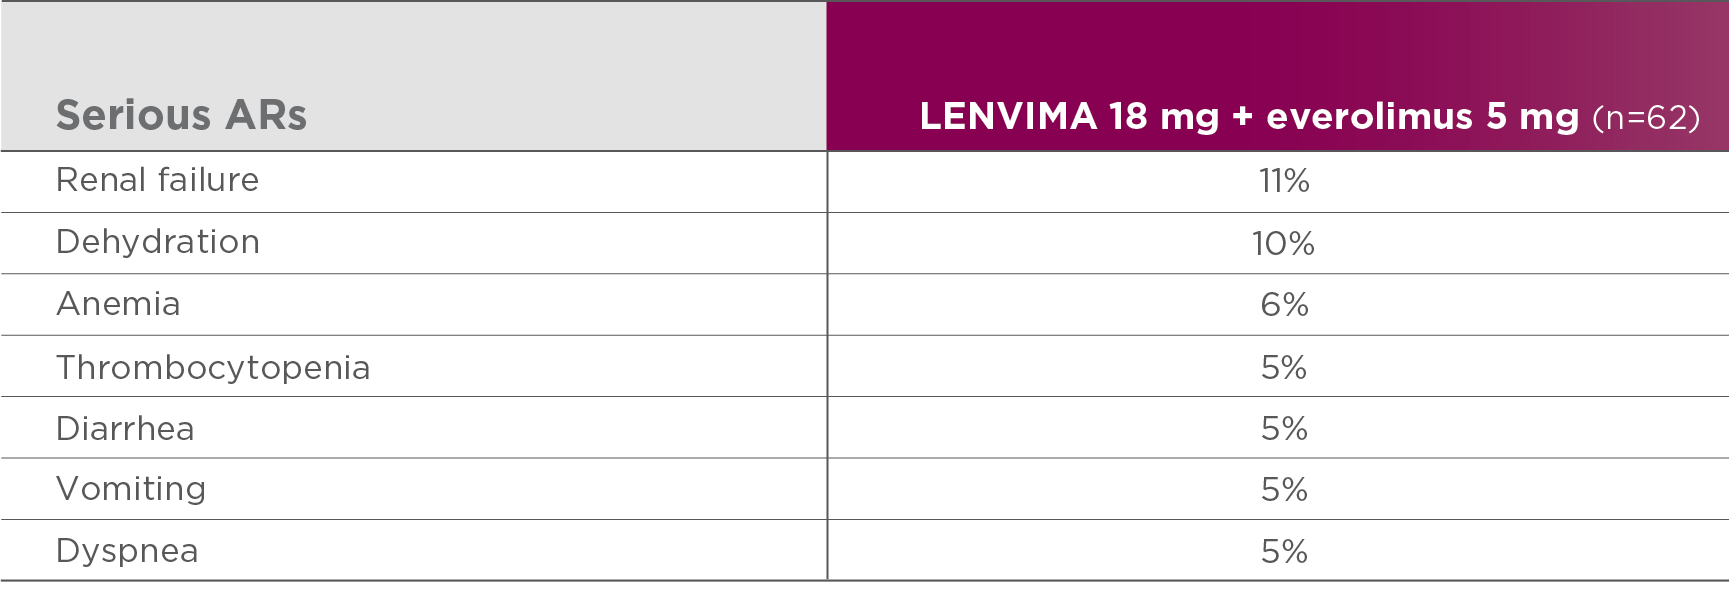 Most common serious adverse reactions in ≥5% of patients in the LENVIMA + everolimus arm of Study 205